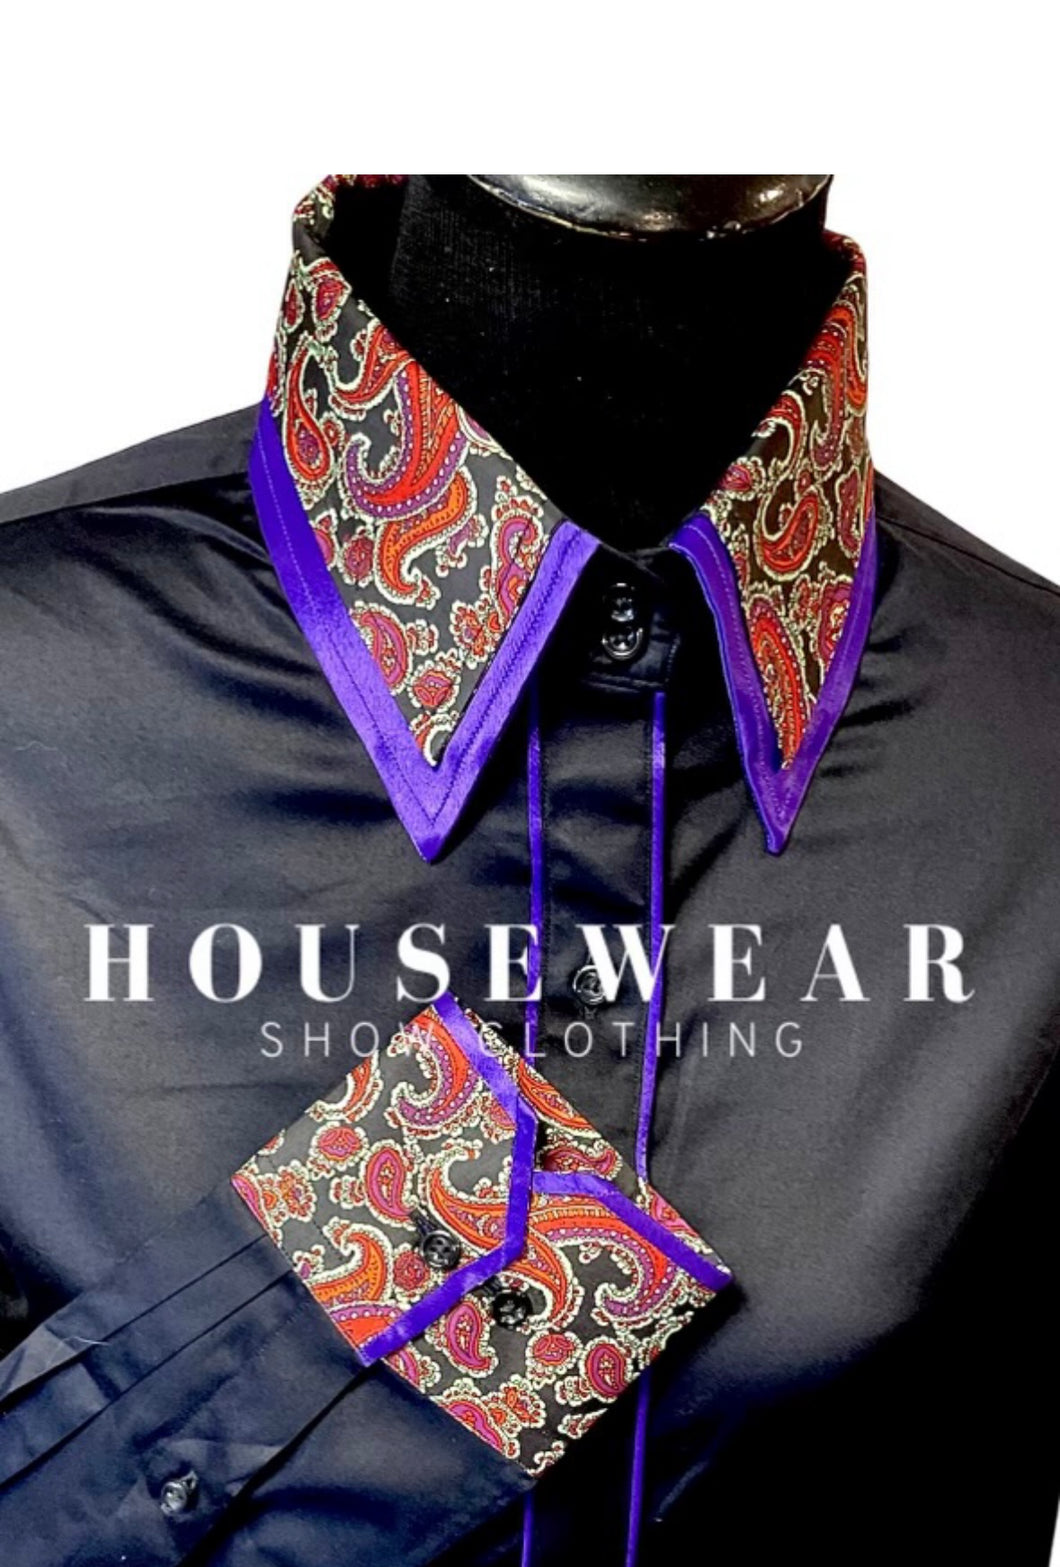 HouseWear Tailored Collection Black w/Purple, Red & Gold Paisley Print- X-Large